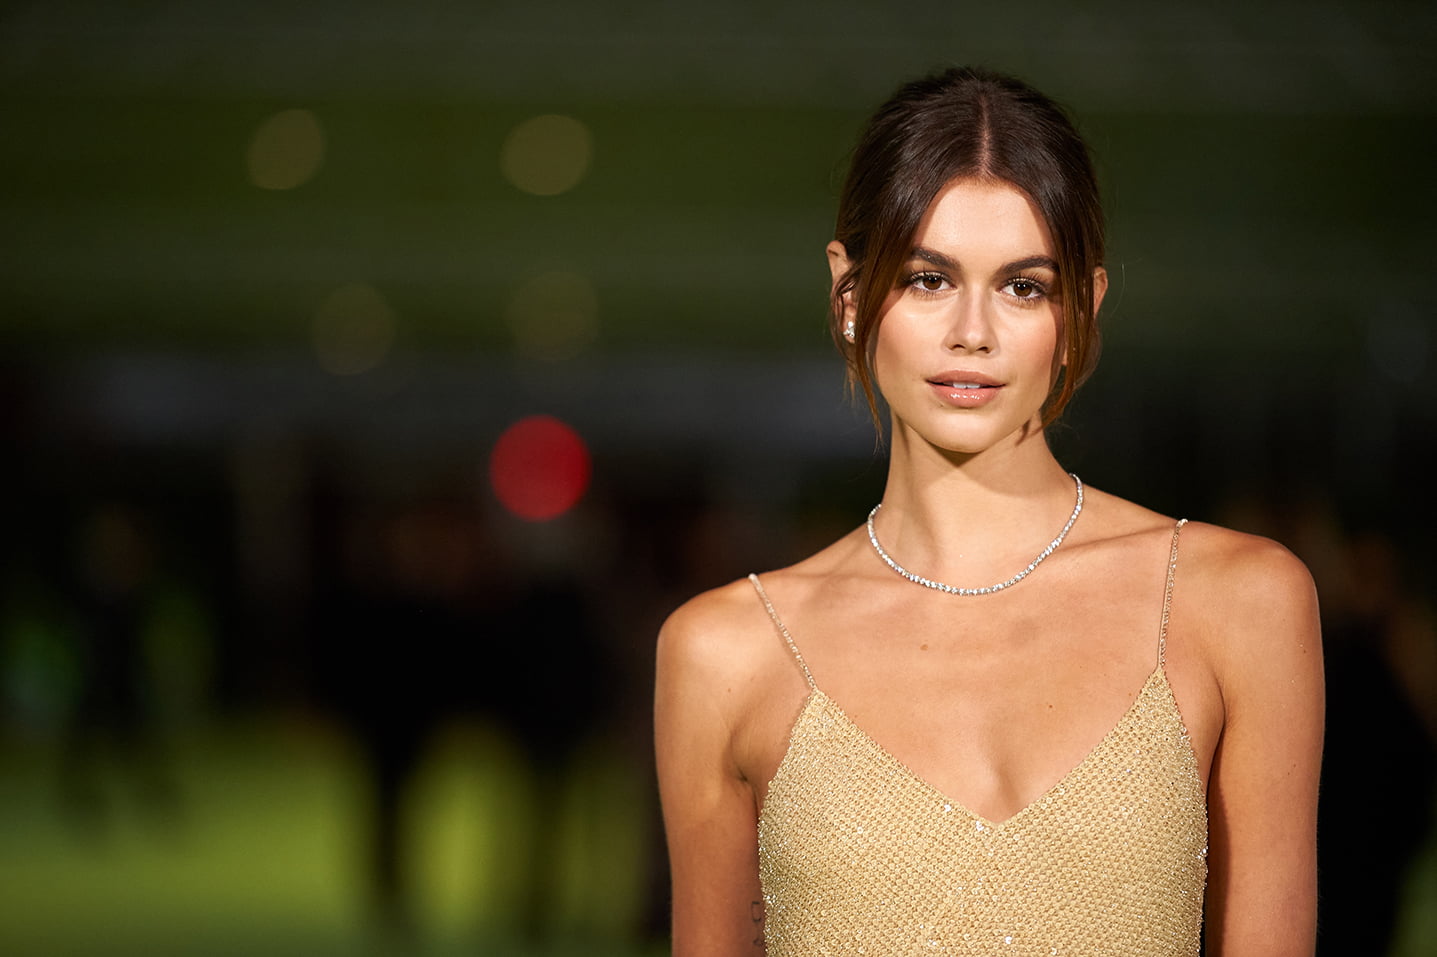 Kaia Gerber attends the Academy Museum of Motion Pictures Opening Gala, September 25, 2021